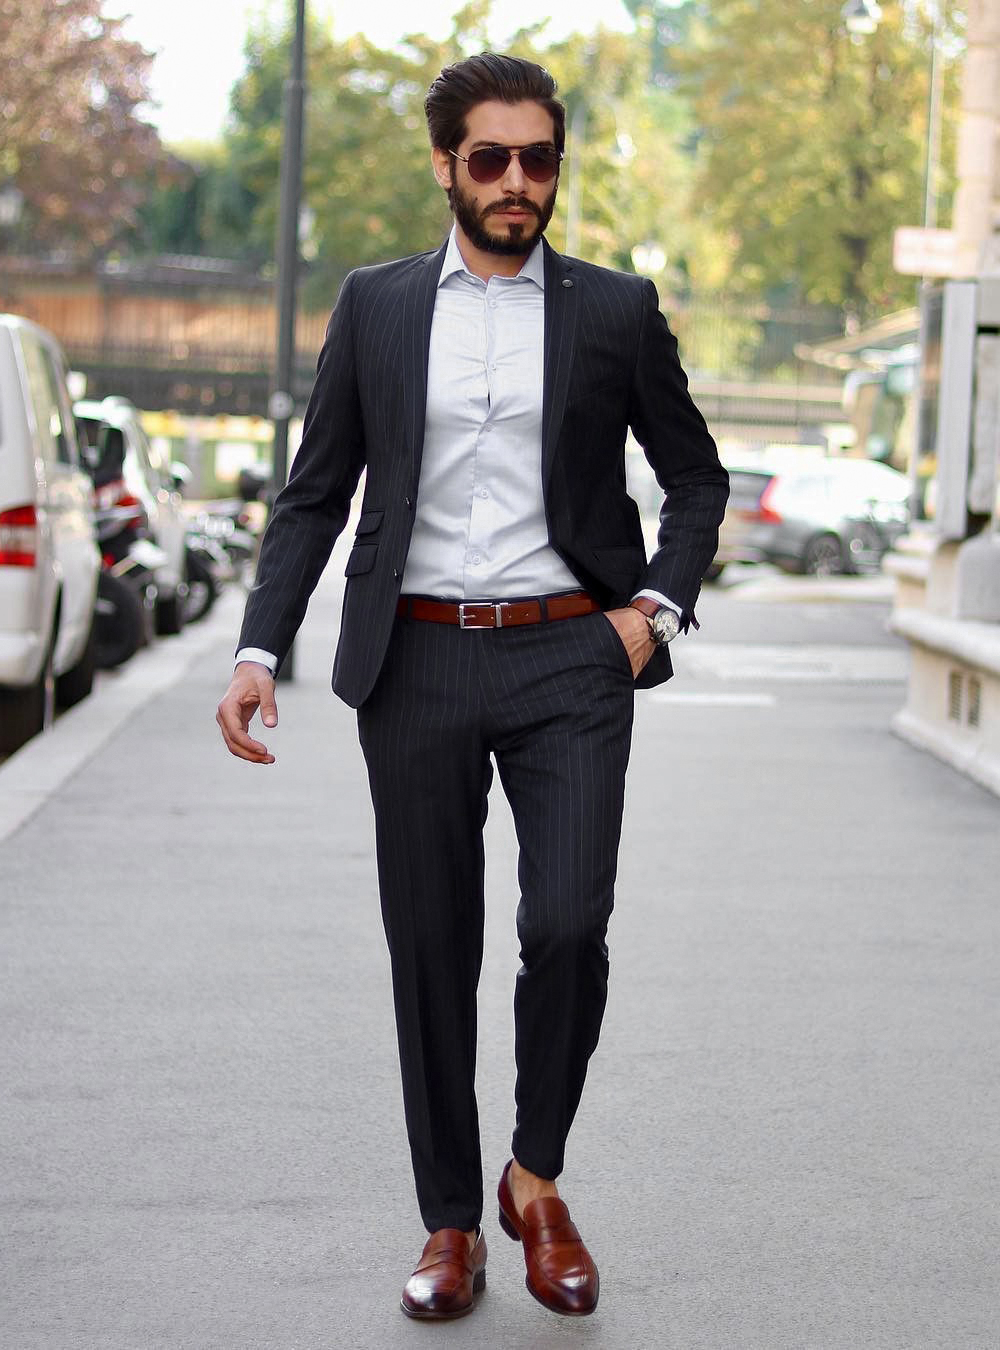 black suit, white dress shirt, and brown loafer shoes